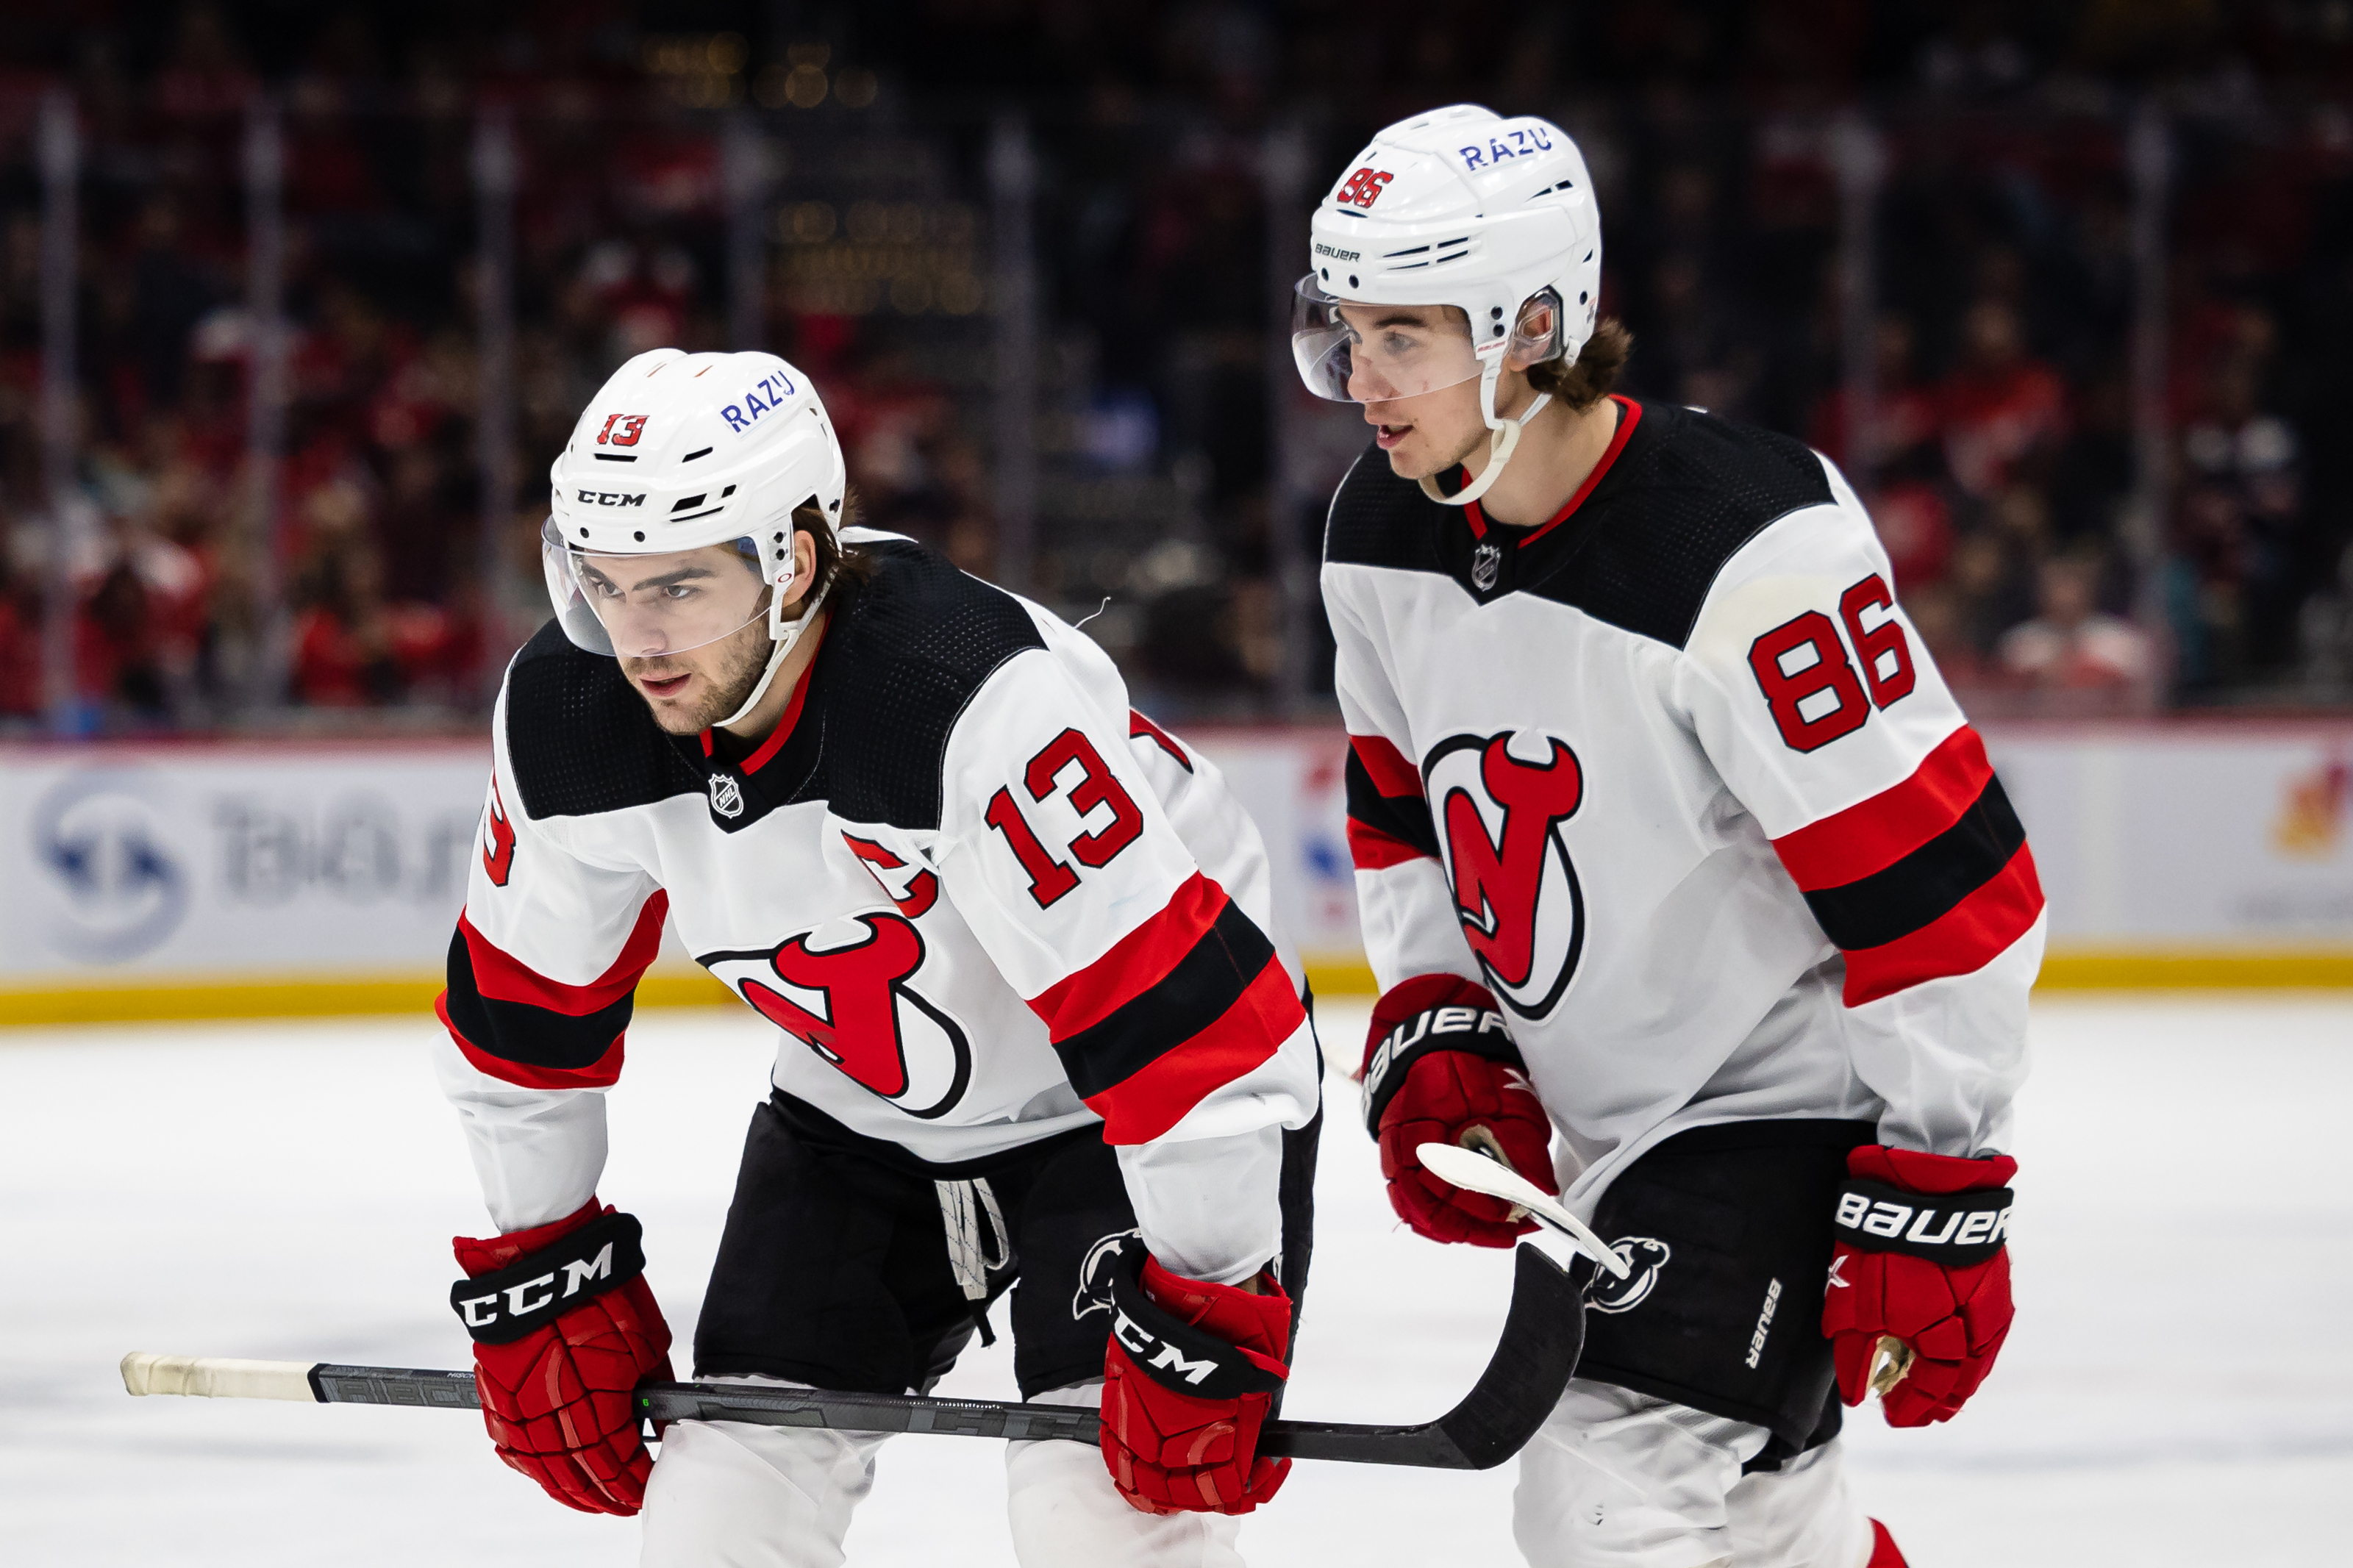 Nico Hischier on X: Very happy to sign my first NHL contract